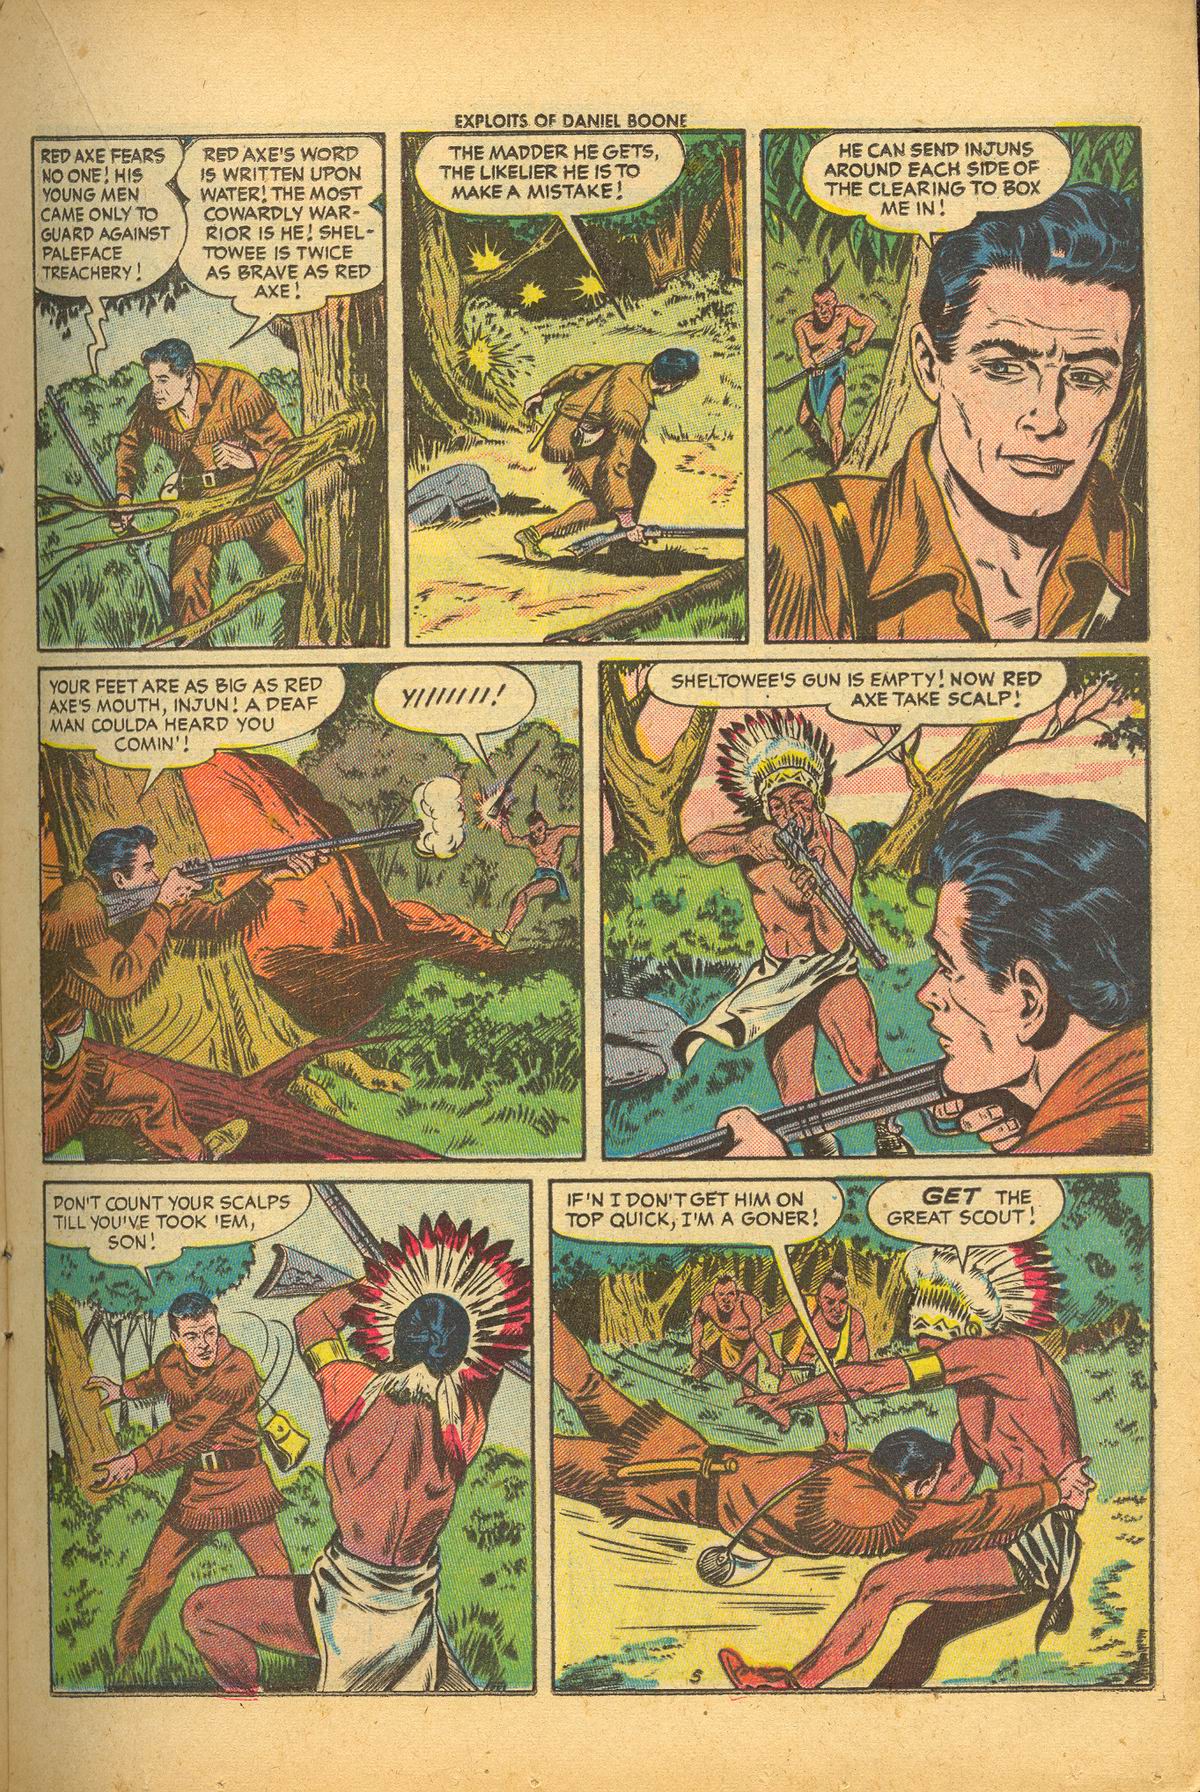 Read online Exploits of Daniel Boone comic -  Issue #2 - 17